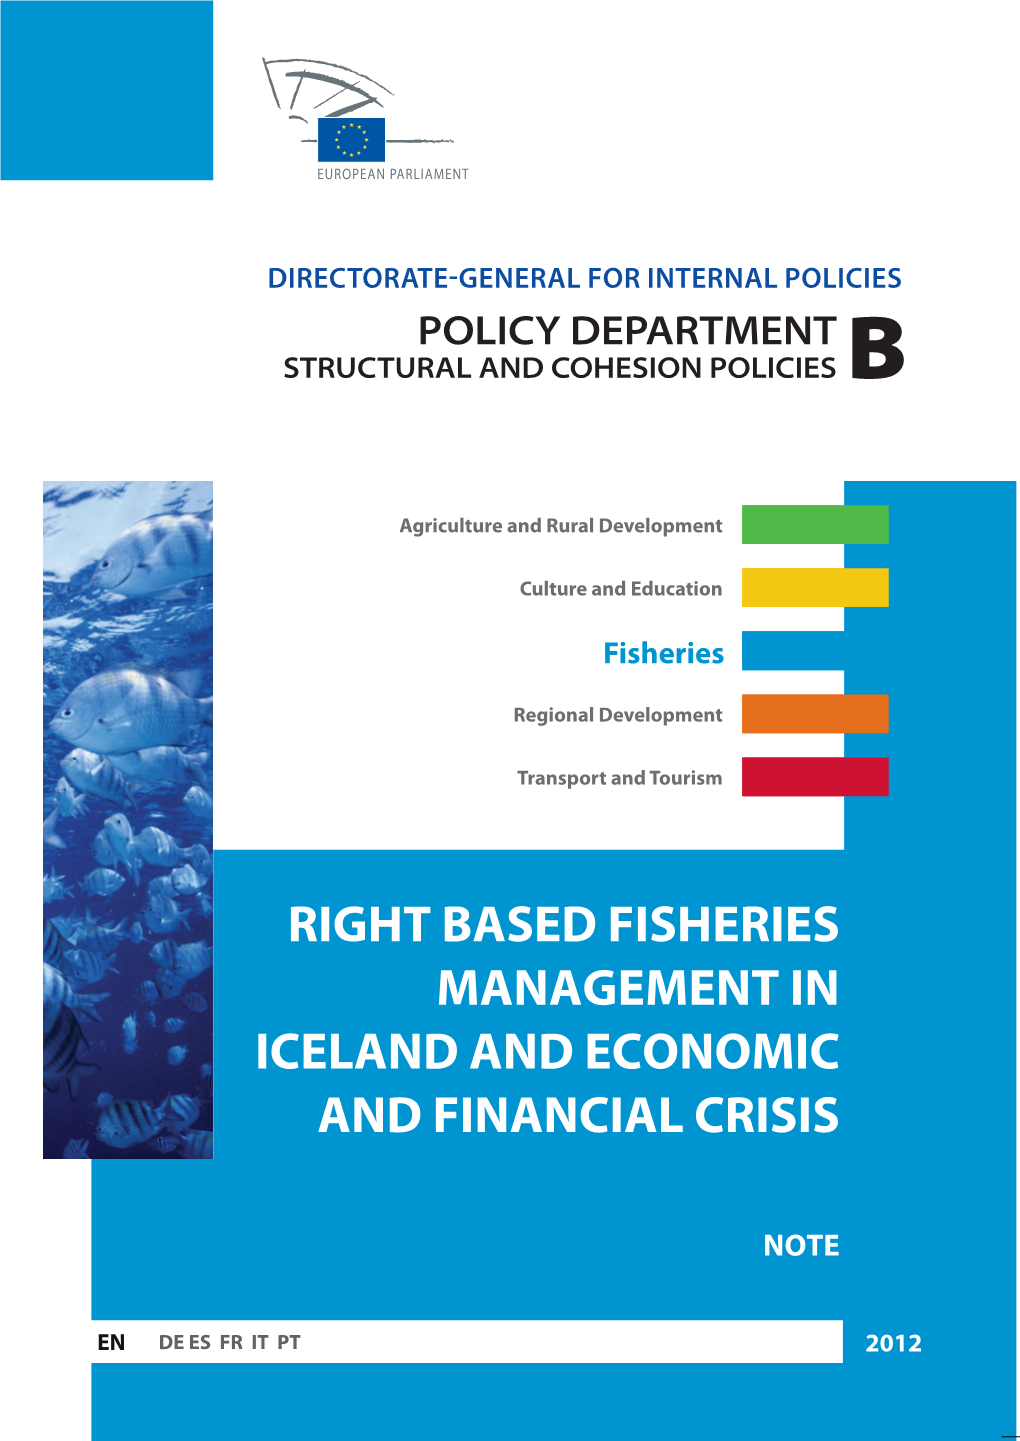 Right Based Fisheries Management in Iceland and Economic and Financial Crisis